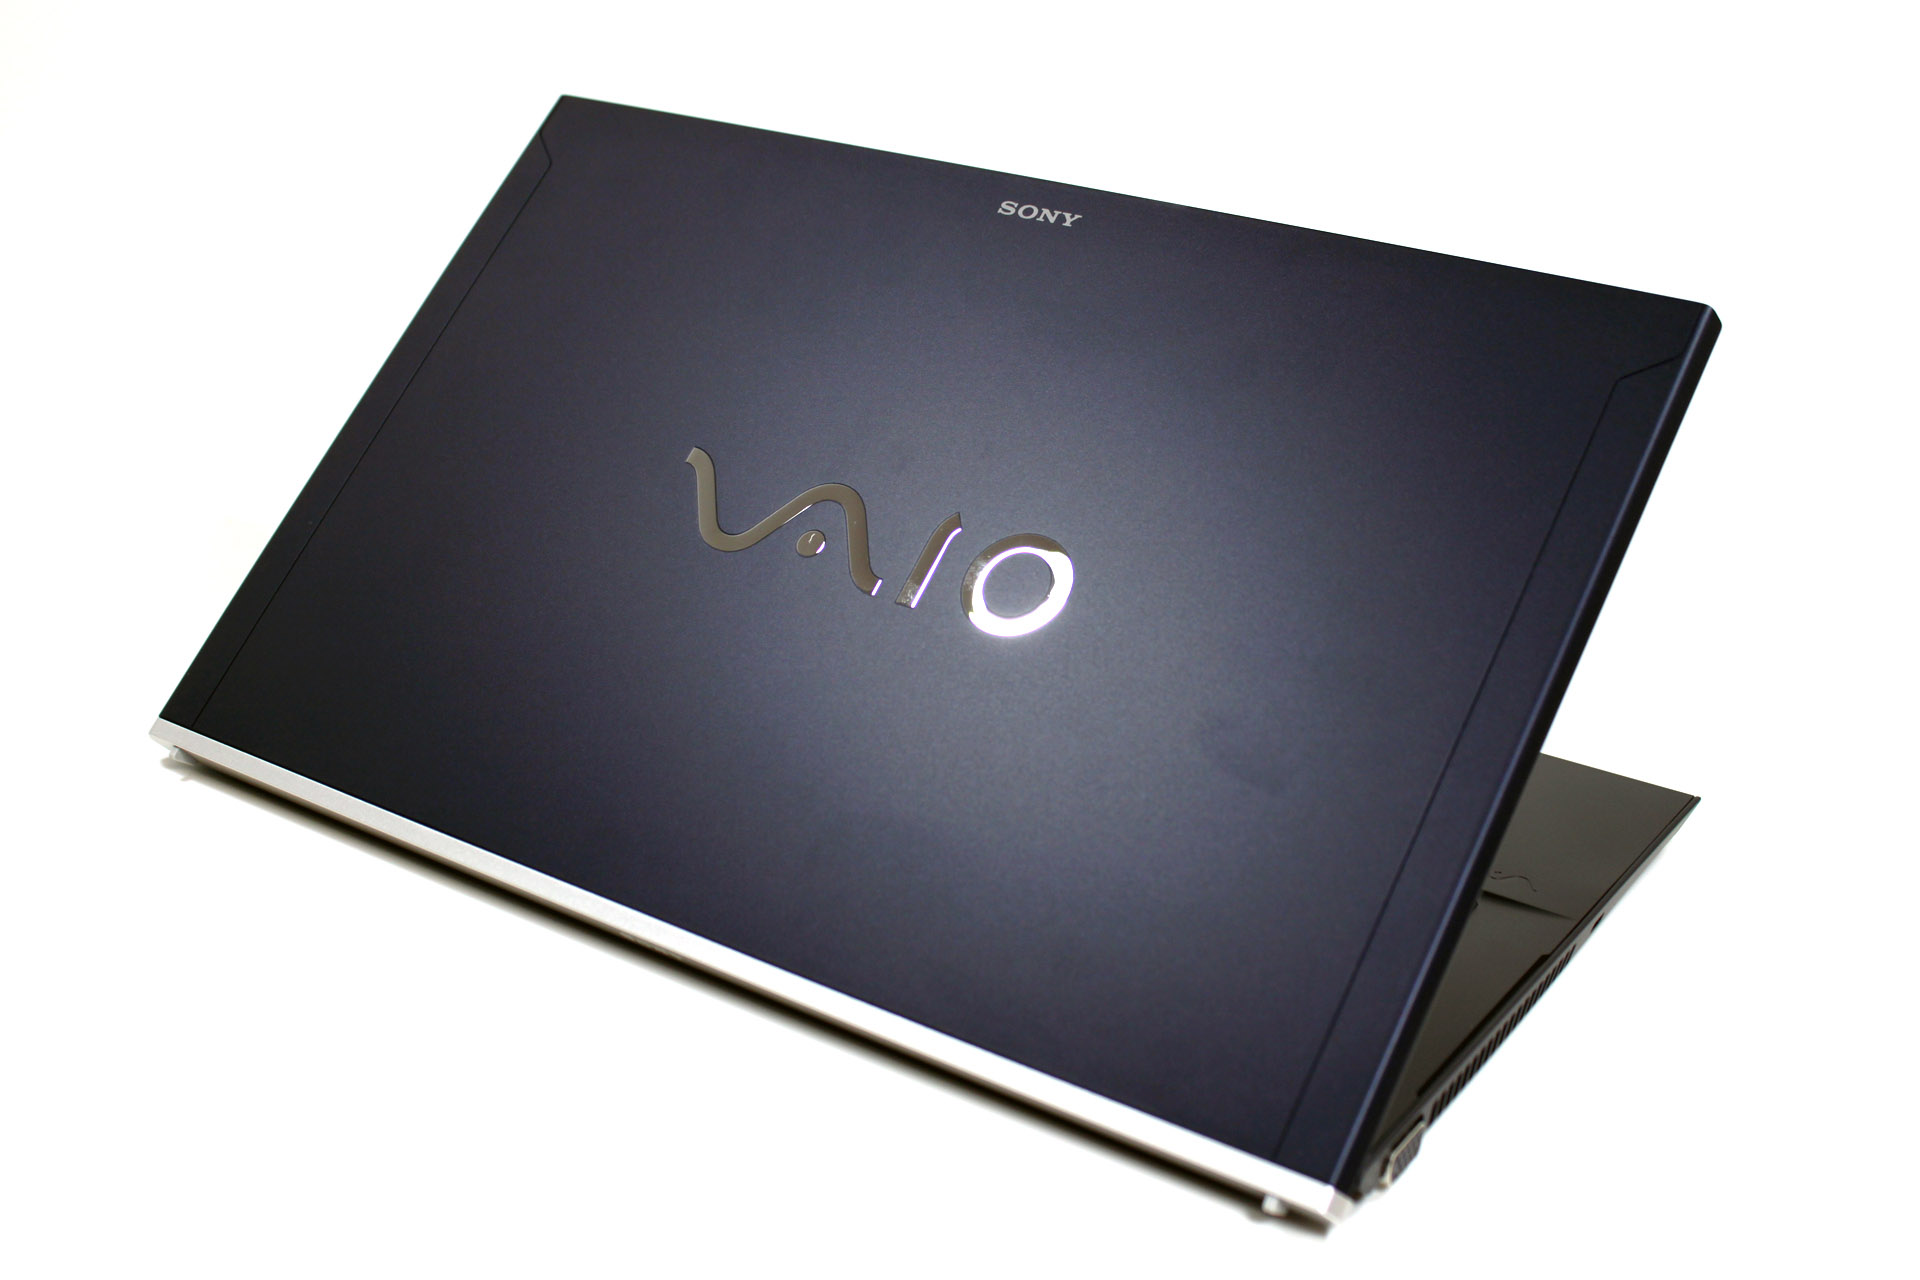 PC/タブレット ノートPC Sony Vaio VPC-Z21Q9E - Notebookcheck.net External Reviews